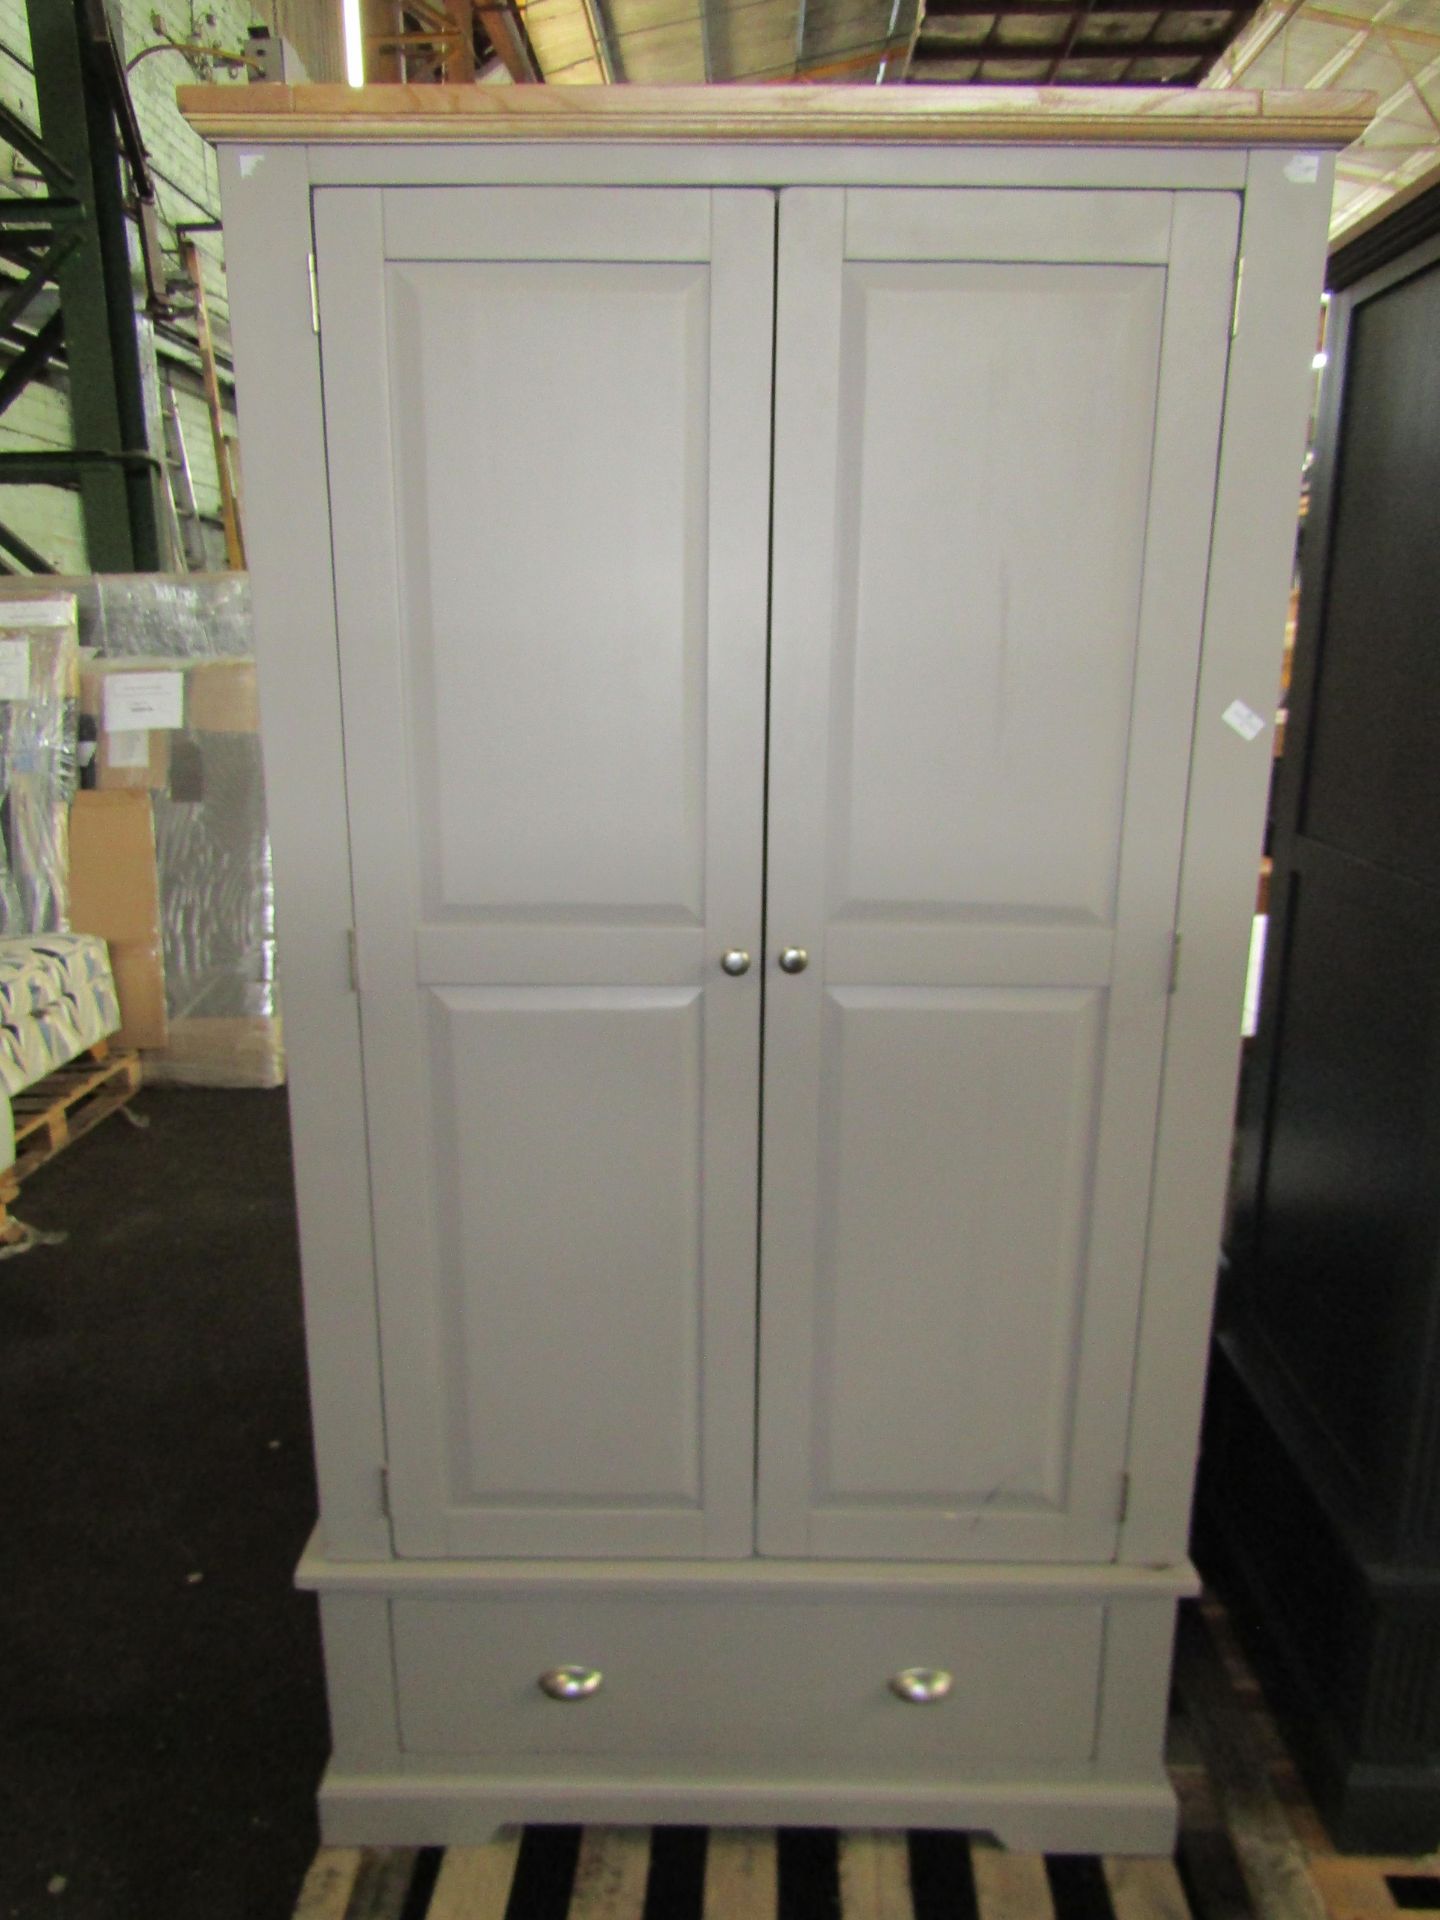 Oak Furnitureland St Ives Natural Oak And Light Grey Painted Double Wardrobe, Does have noticeable